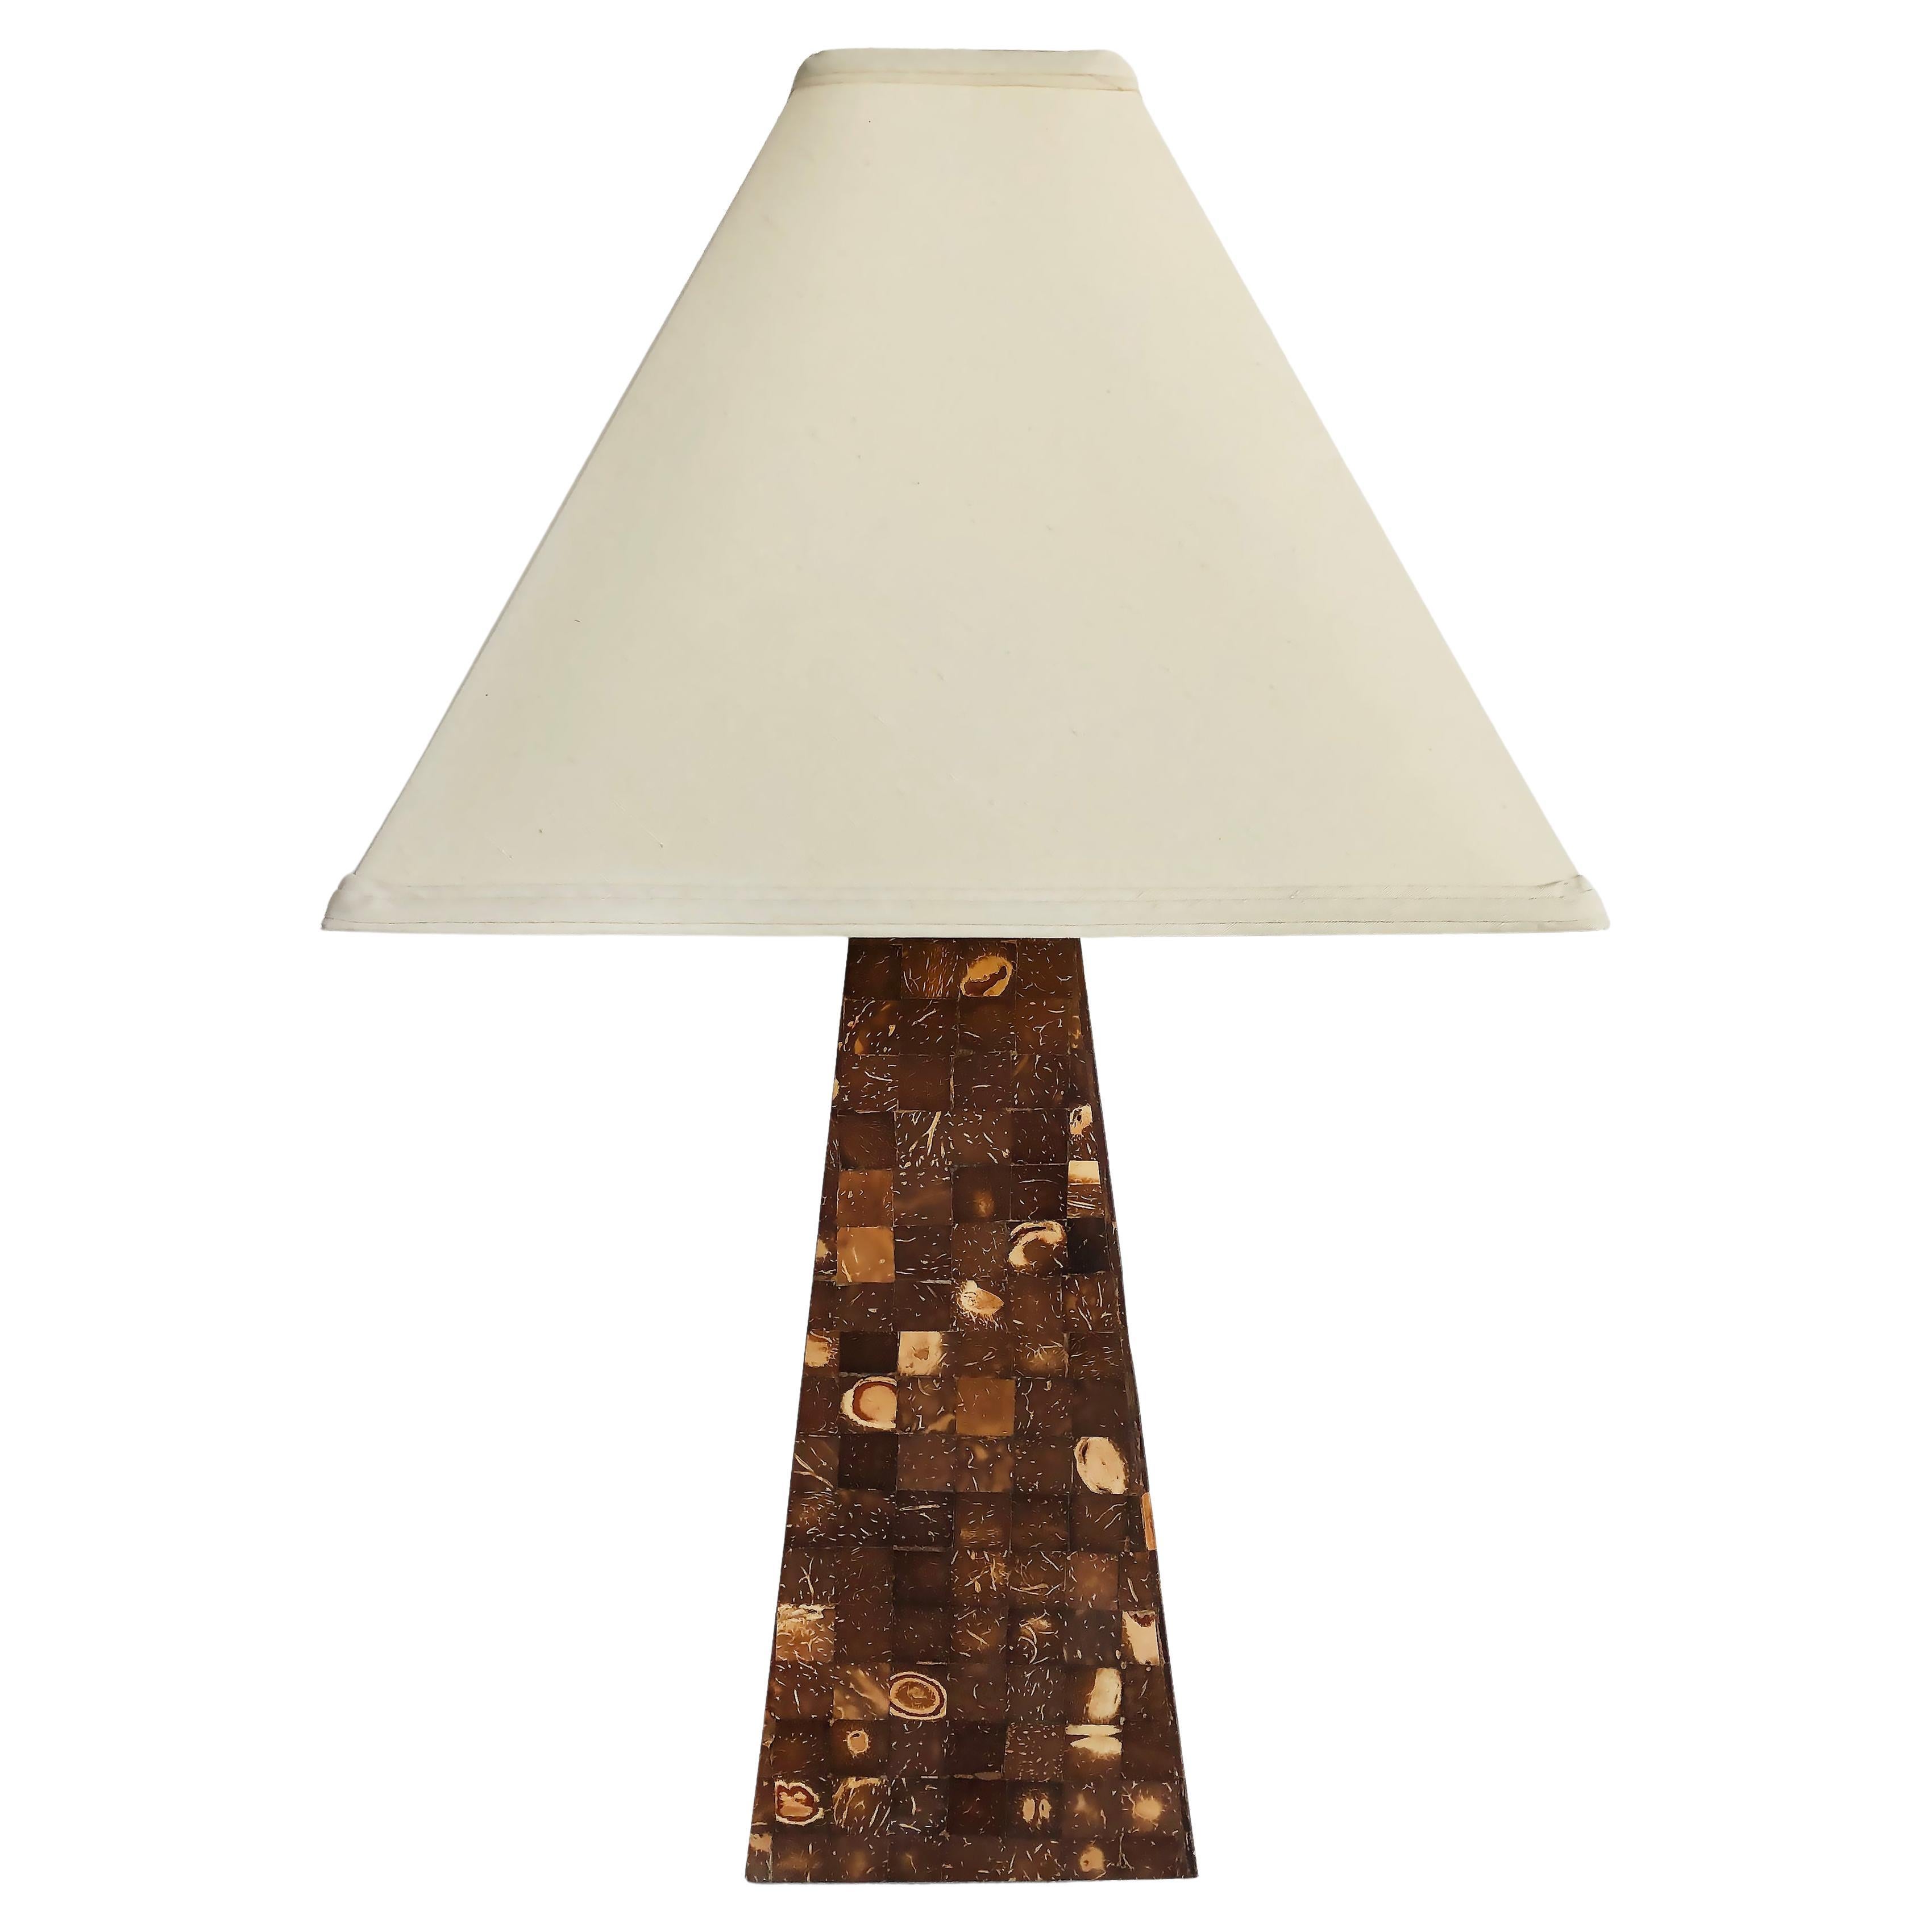 Vintage Tessellated Coconut Shell Table Lamp